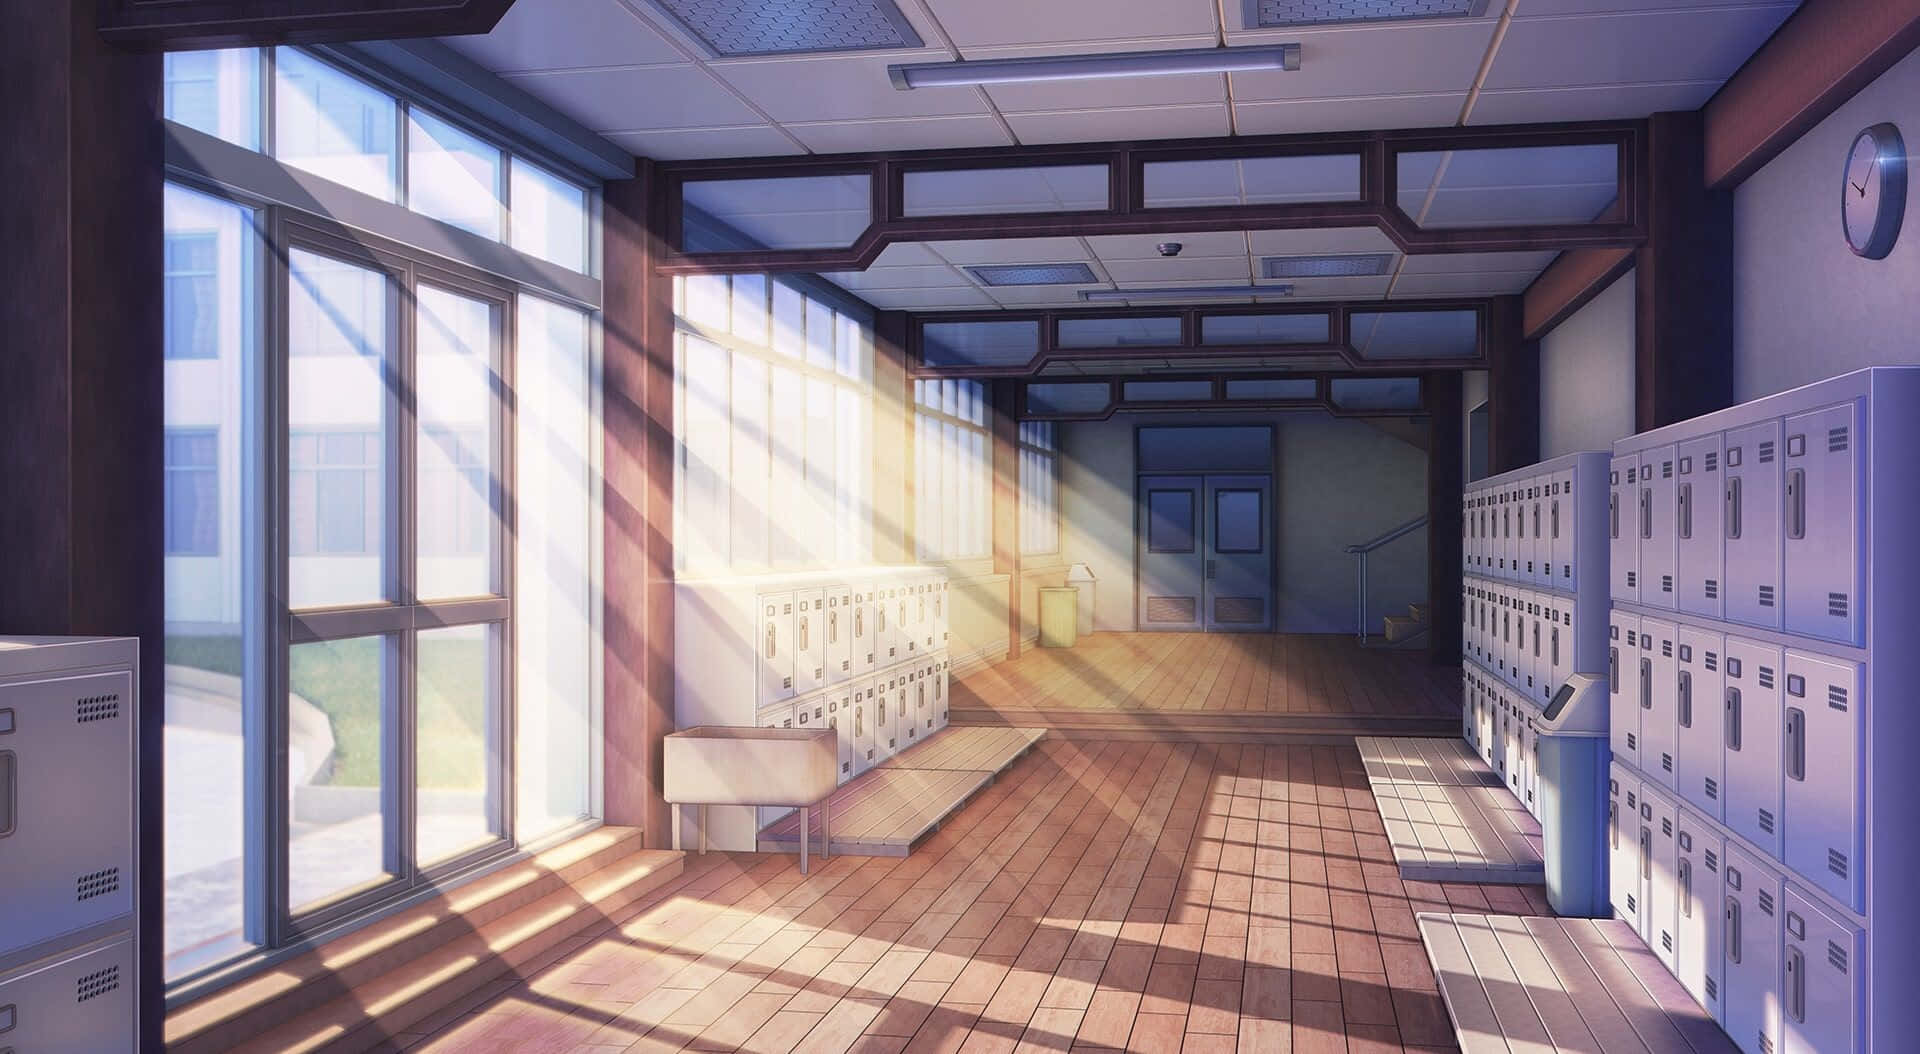 A Hallway With Lockers And Sunlight Shining Through